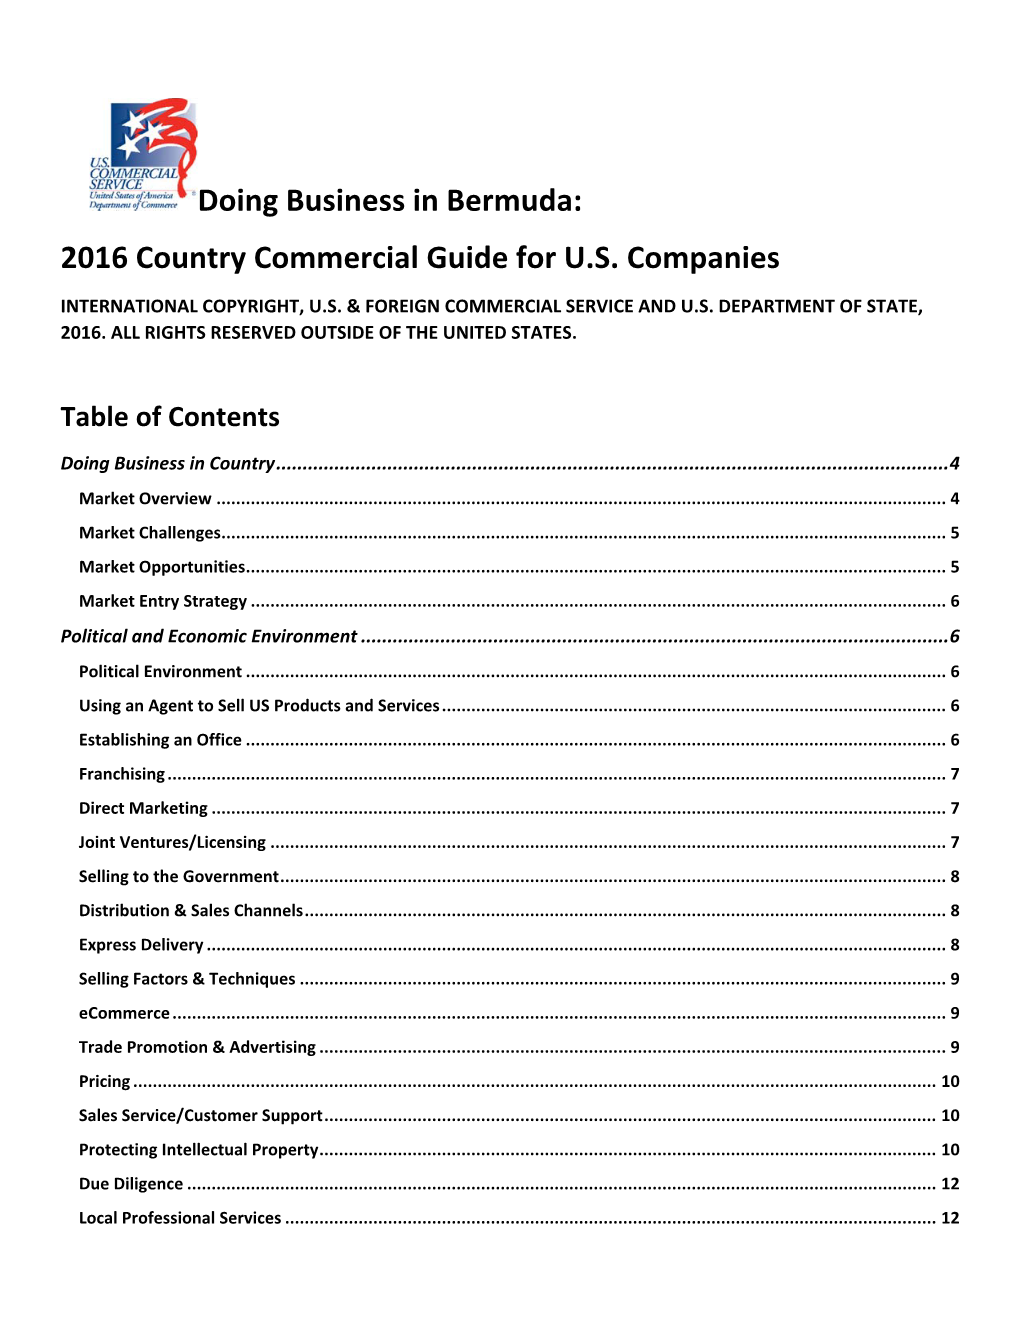 Doing Business in Bermuda: 2016 Country Commercial Guide for U.S. Companies